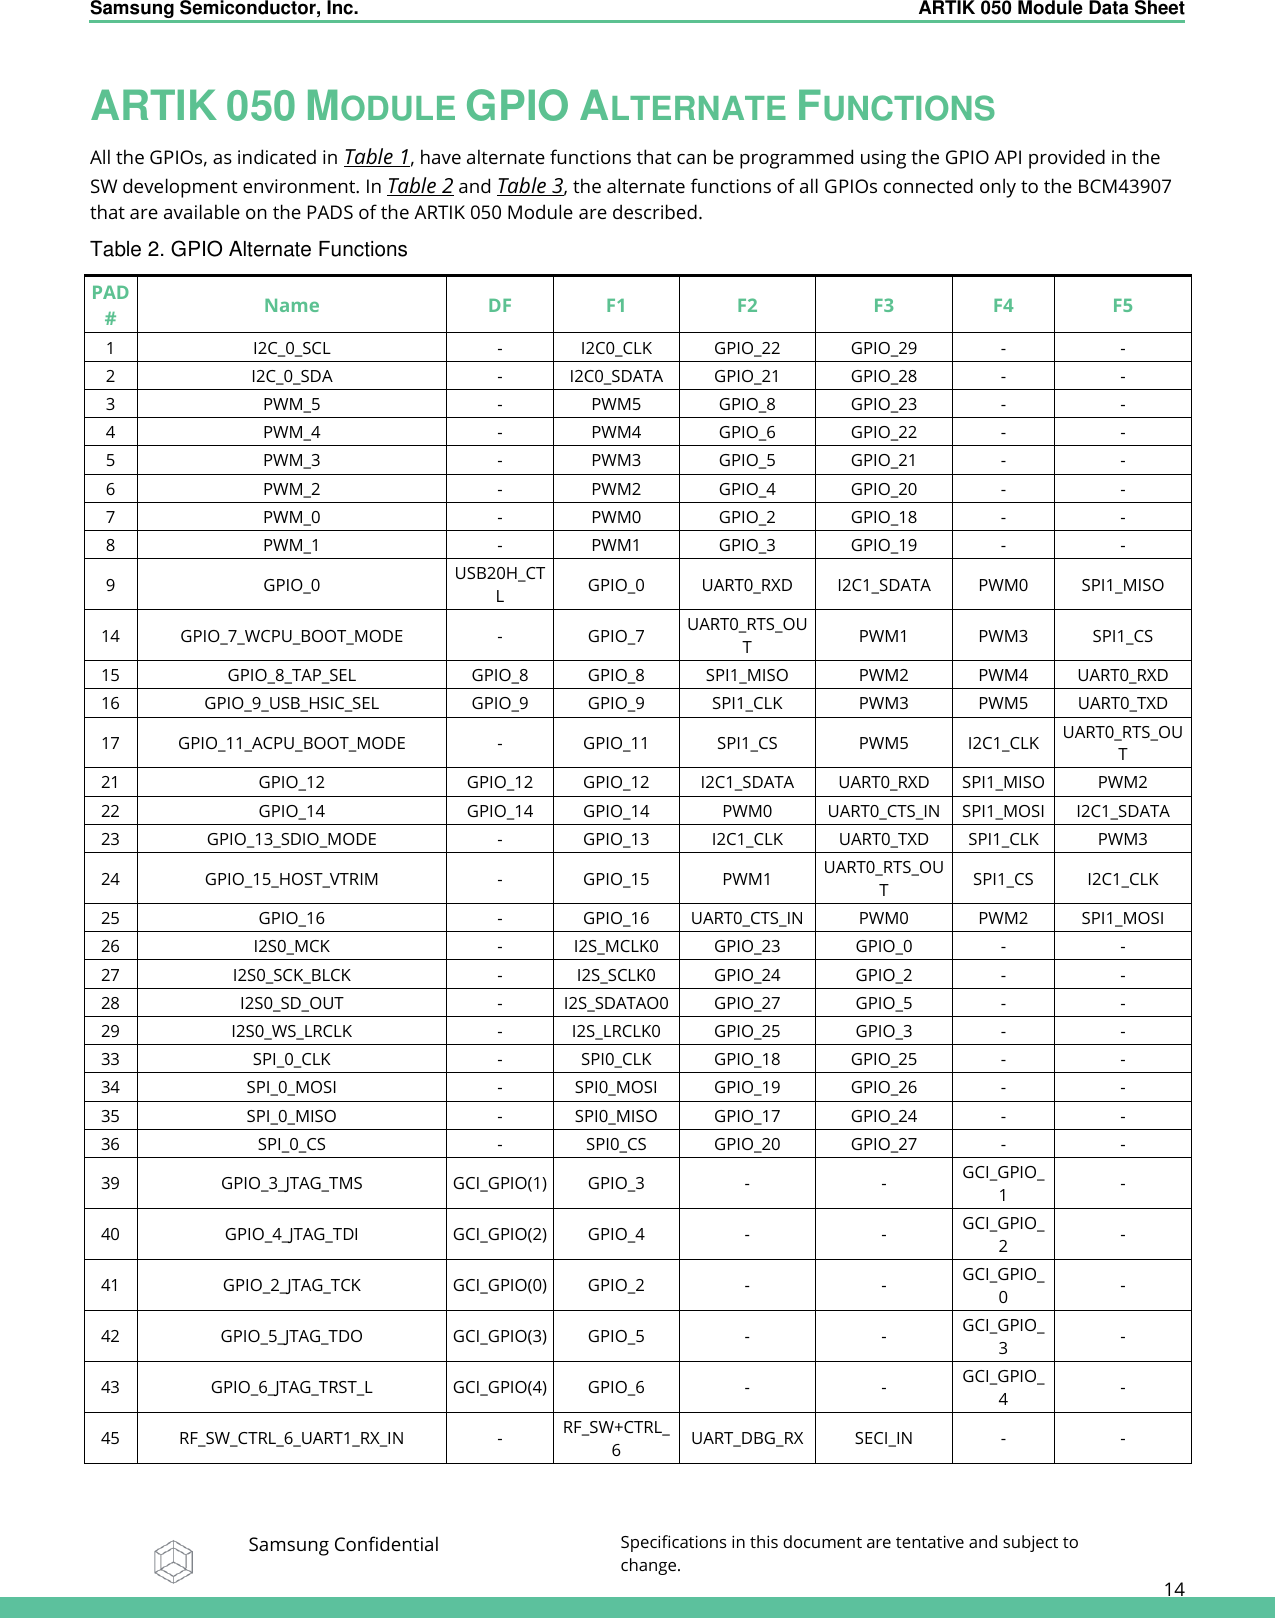 Samsung Semiconductor, Inc.  ARTIK 050 Module Data Sheet   Samsung Confidential Specifications in this document are tentative and subject to change.  14 ARTIK 050 MODULE GPIO ALTERNATE FUNCTIONS All the GPIOs, as indicated in Table 1, have alternate functions that can be programmed using the GPIO API provided in the SW development environment. In Table 2 and Table 3, the alternate functions of all GPIOs connected only to the BCM43907 that are available on the PADS of the ARTIK 050 Module are described. Table 2. GPIO Alternate Functions PAD# Name DF F1 F2 F3 F4 F5 1 I2C_0_SCL - I2C0_CLK GPIO_22 GPIO_29 - - 2 I2C_0_SDA - I2C0_SDATA GPIO_21 GPIO_28 - - 3 PWM_5 - PWM5 GPIO_8 GPIO_23 - - 4 PWM_4 - PWM4 GPIO_6 GPIO_22 - - 5 PWM_3 - PWM3 GPIO_5 GPIO_21 - - 6 PWM_2 - PWM2 GPIO_4 GPIO_20 - - 7 PWM_0 - PWM0 GPIO_2 GPIO_18 - - 8 PWM_1 - PWM1 GPIO_3 GPIO_19 - - 9 GPIO_0 USB20H_CTL GPIO_0 UART0_RXD I2C1_SDATA PWM0 SPI1_MISO 14 GPIO_7_WCPU_BOOT_MODE - GPIO_7 UART0_RTS_OUT PWM1 PWM3 SPI1_CS 15 GPIO_8_TAP_SEL GPIO_8 GPIO_8 SPI1_MISO PWM2 PWM4 UART0_RXD 16 GPIO_9_USB_HSIC_SEL GPIO_9 GPIO_9 SPI1_CLK PWM3 PWM5 UART0_TXD 17 GPIO_11_ACPU_BOOT_MODE - GPIO_11 SPI1_CS PWM5 I2C1_CLK UART0_RTS_OUT 21 GPIO_12 GPIO_12 GPIO_12 I2C1_SDATA UART0_RXD SPI1_MISO PWM2 22 GPIO_14 GPIO_14 GPIO_14 PWM0 UART0_CTS_IN SPI1_MOSI I2C1_SDATA 23 GPIO_13_SDIO_MODE - GPIO_13 I2C1_CLK UART0_TXD SPI1_CLK PWM3 24 GPIO_15_HOST_VTRIM - GPIO_15 PWM1 UART0_RTS_OUT SPI1_CS I2C1_CLK 25 GPIO_16 - GPIO_16 UART0_CTS_IN PWM0 PWM2 SPI1_MOSI 26 I2S0_MCK - I2S_MCLK0 GPIO_23 GPIO_0 - - 27 I2S0_SCK_BLCK - I2S_SCLK0 GPIO_24 GPIO_2 - - 28 I2S0_SD_OUT - I2S_SDATAO0 GPIO_27 GPIO_5 - - 29 I2S0_WS_LRCLK - I2S_LRCLK0 GPIO_25 GPIO_3 - - 33 SPI_0_CLK - SPI0_CLK GPIO_18 GPIO_25 - - 34 SPI_0_MOSI - SPI0_MOSI GPIO_19 GPIO_26 - - 35 SPI_0_MISO - SPI0_MISO GPIO_17 GPIO_24 - - 36 SPI_0_CS - SPI0_CS GPIO_20 GPIO_27 - - 39 GPIO_3_JTAG_TMS GCI_GPIO(1) GPIO_3 - - GCI_GPIO_1 - 40 GPIO_4_JTAG_TDI GCI_GPIO(2) GPIO_4 - - GCI_GPIO_2 - 41 GPIO_2_JTAG_TCK GCI_GPIO(0) GPIO_2 - - GCI_GPIO_0 - 42 GPIO_5_JTAG_TDO GCI_GPIO(3) GPIO_5 - - GCI_GPIO_3 - 43 GPIO_6_JTAG_TRST_L GCI_GPIO(4) GPIO_6 - - GCI_GPIO_4 - 45 RF_SW_CTRL_6_UART1_RX_IN - RF_SW+CTRL_6 UART_DBG_RX SECI_IN - - 